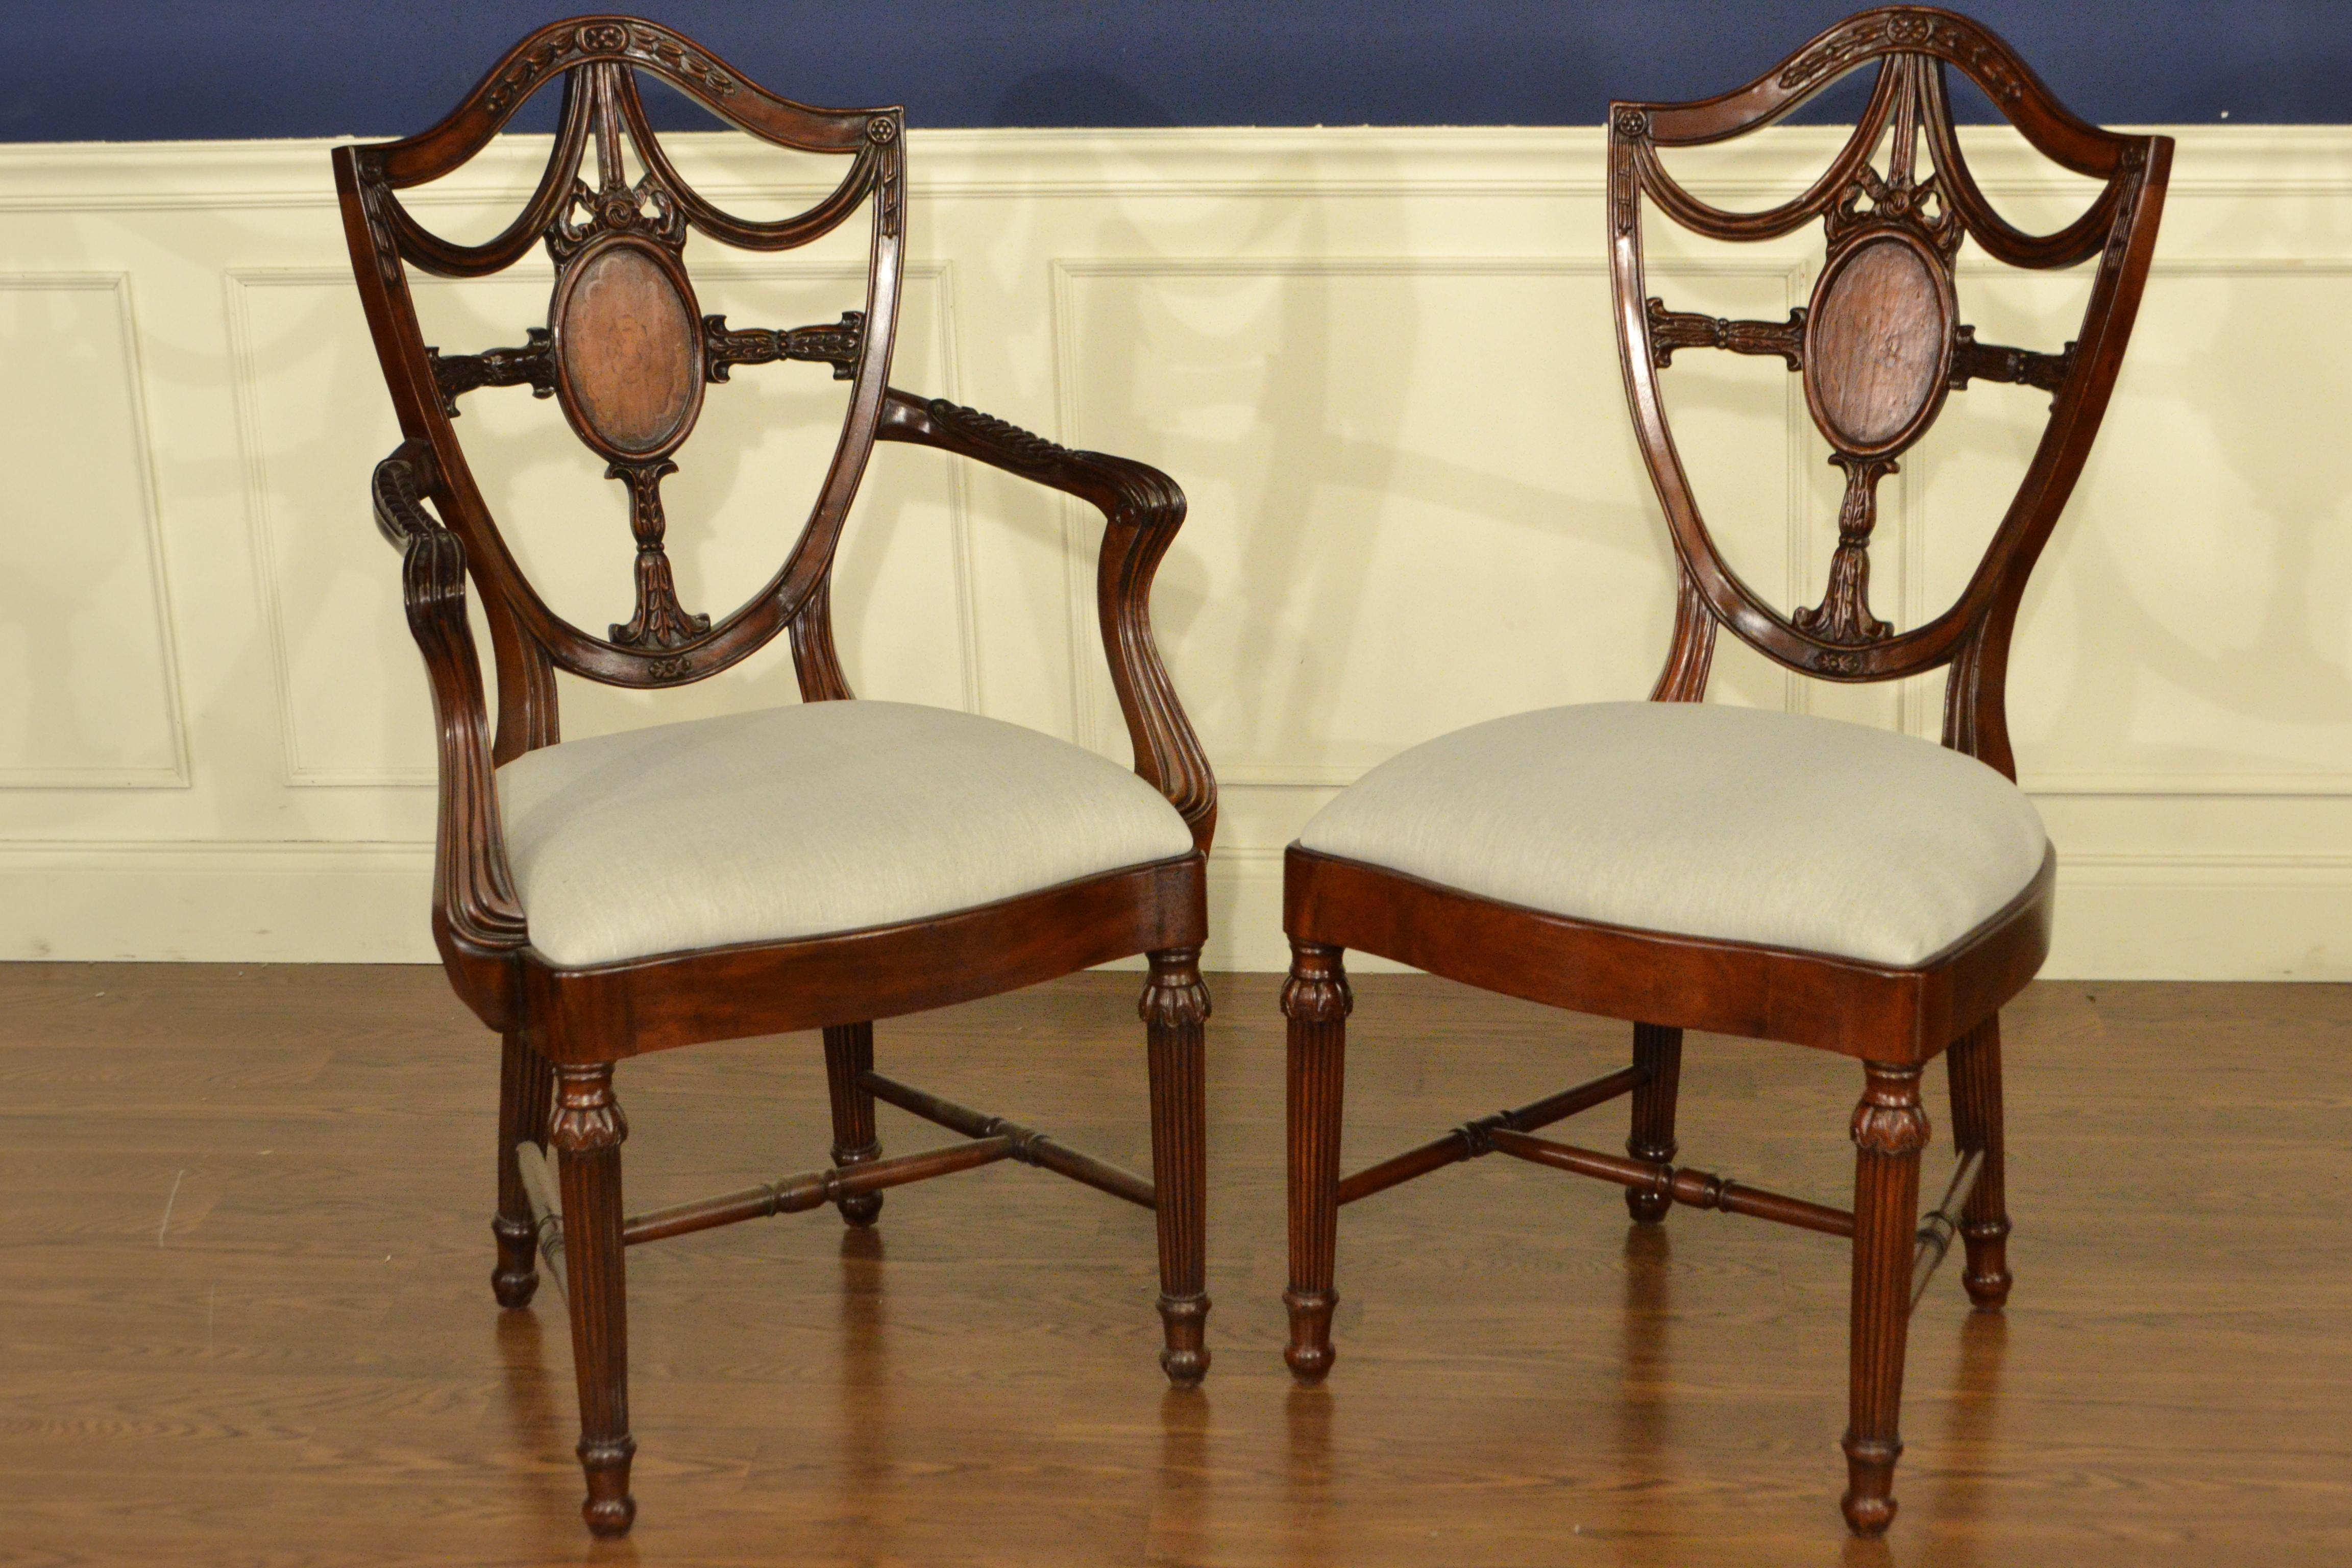 Contemporary Eight New Traditional Mahogany Inlaid Shieldback Dining Chairs by Leighton Hall